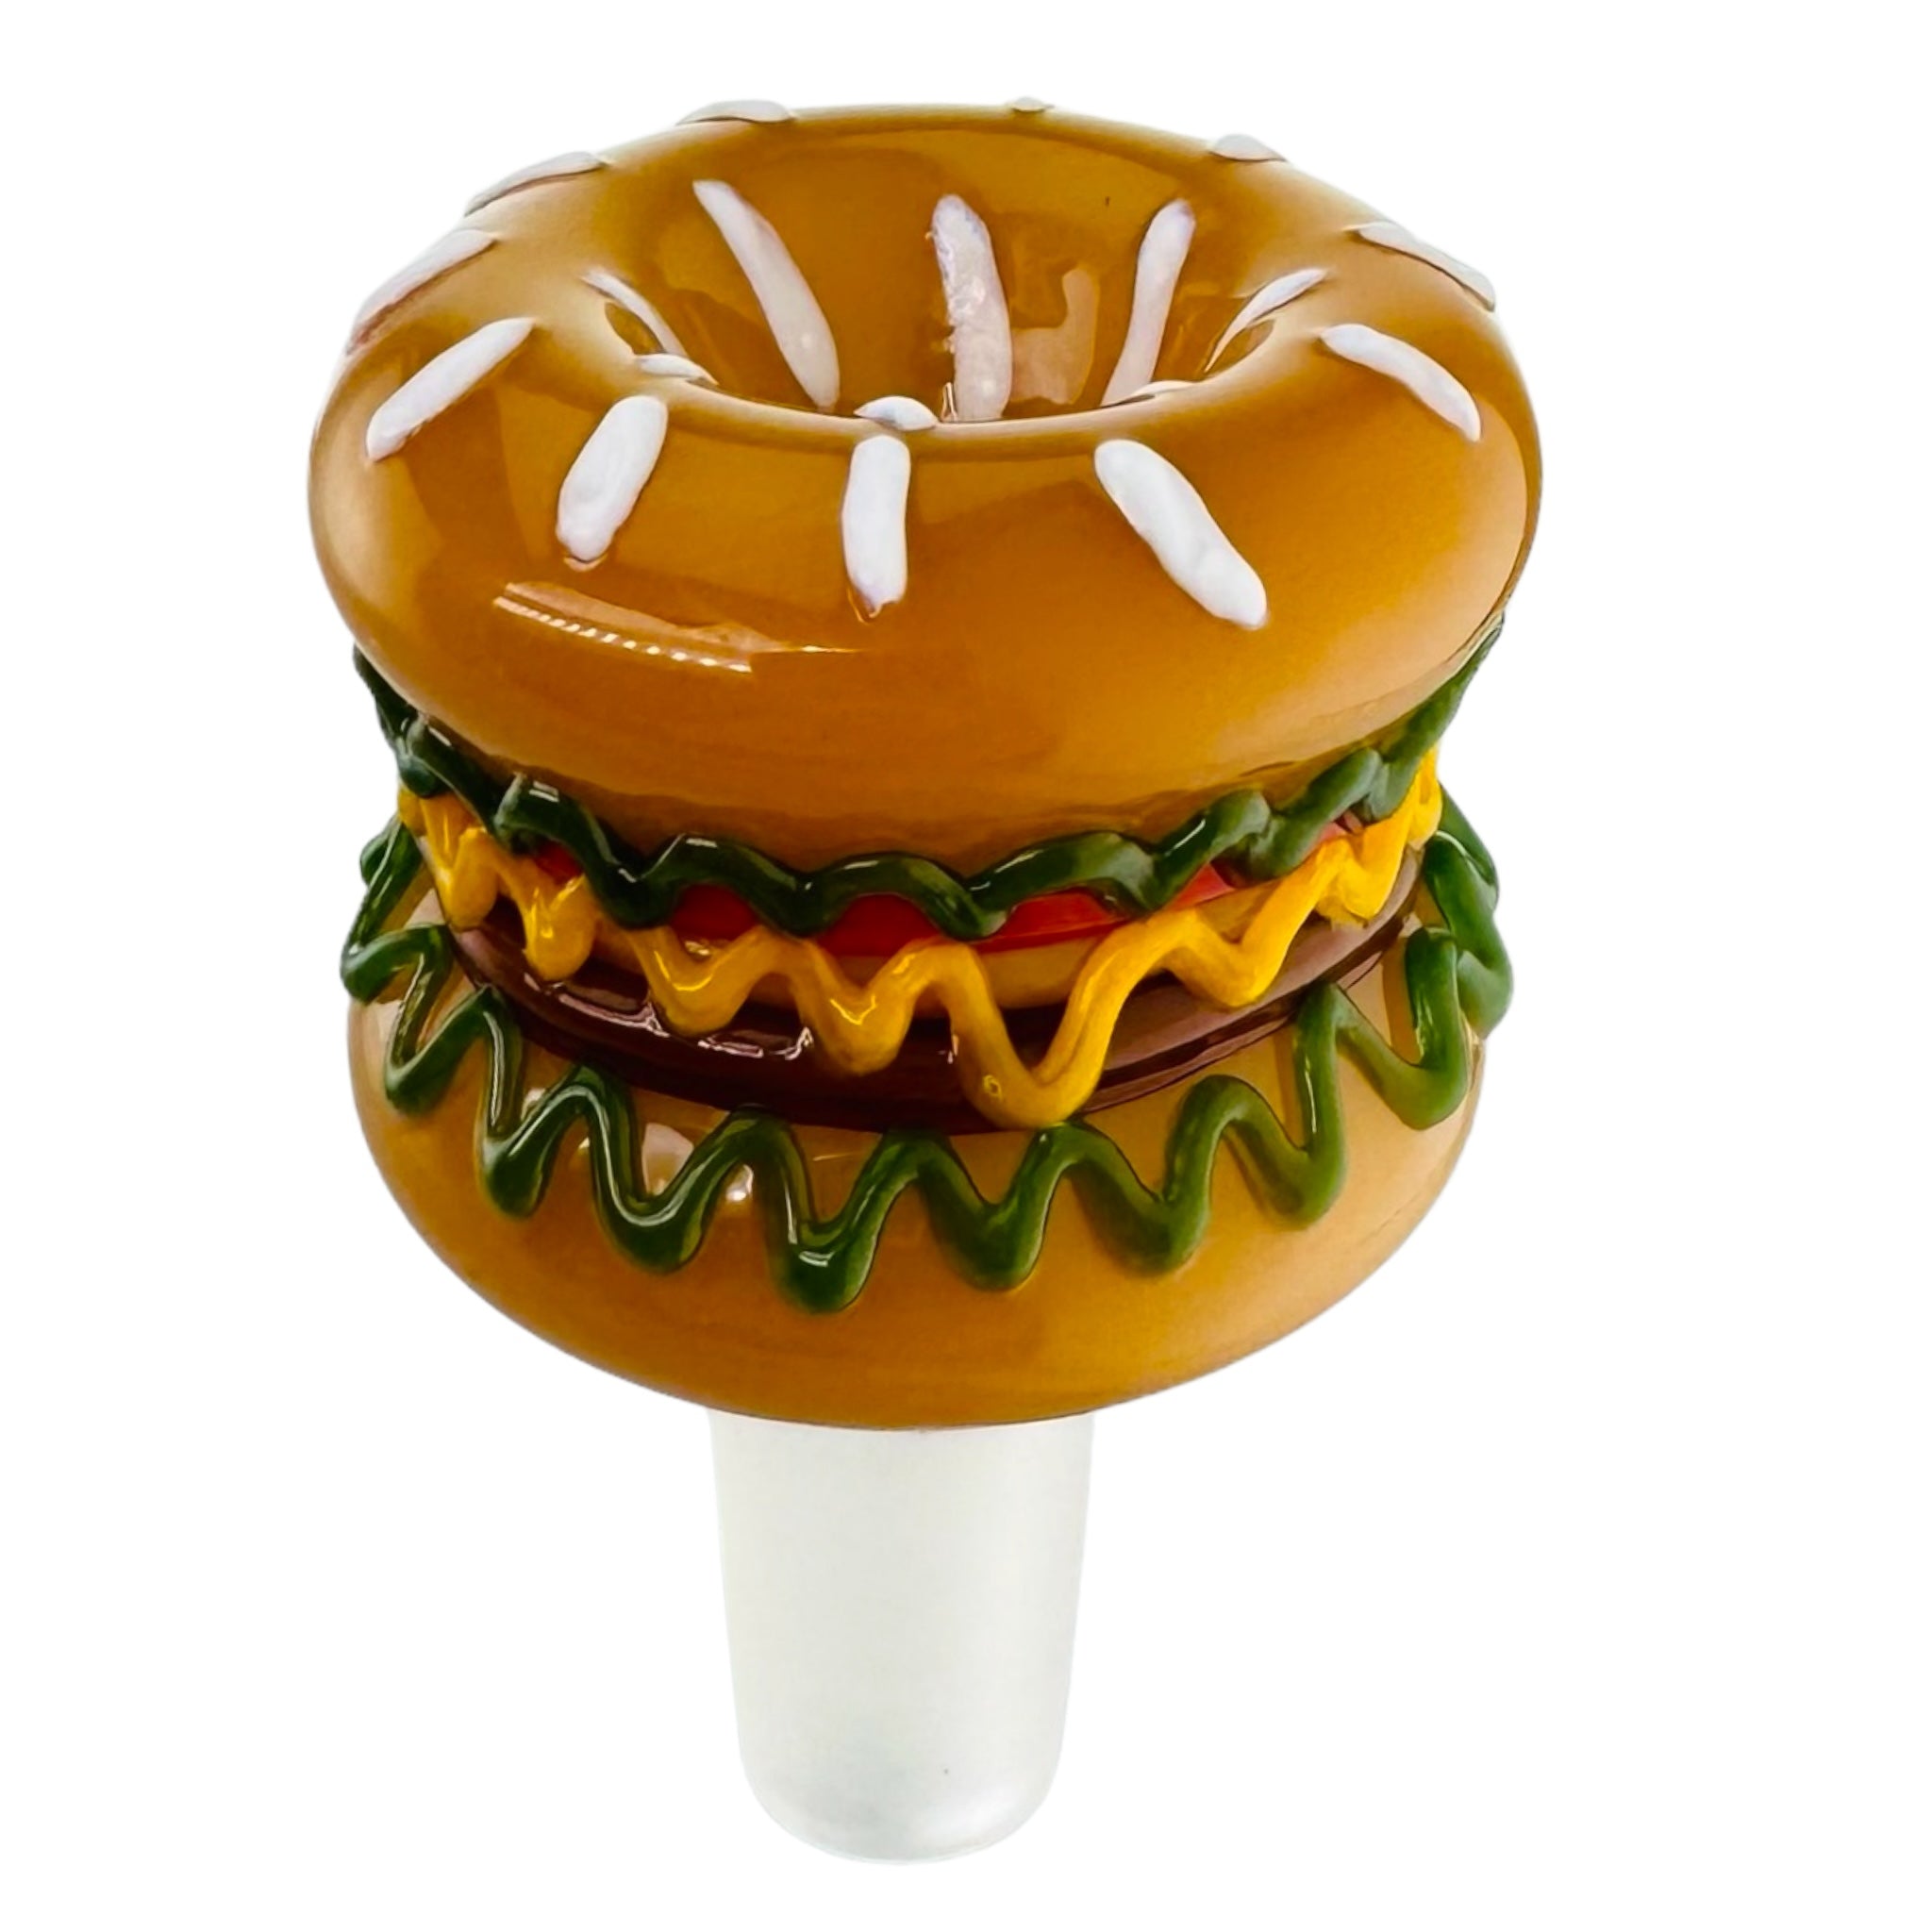 14mm bong bowl that looks like a Hamburger for sale free shipping